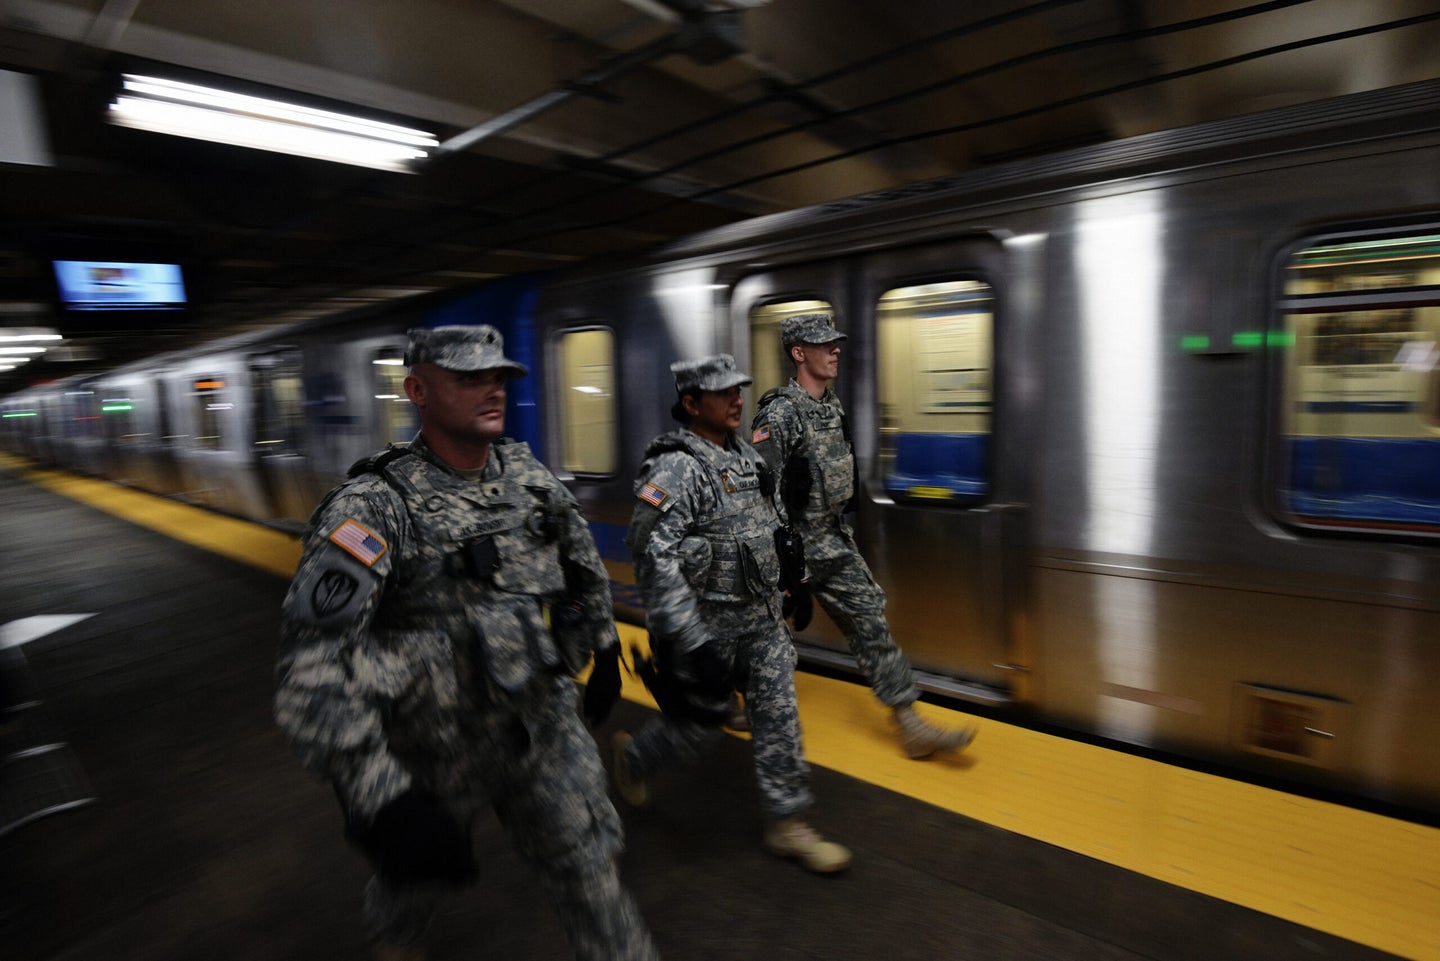 Members of the New York National Guard will deploy to the NYC subway system to patrol platforms and help check bags, Gov. Kathy Hochul announced Wednesday.(Air National Guard / Staff Sergeant Christopher S Muncy)